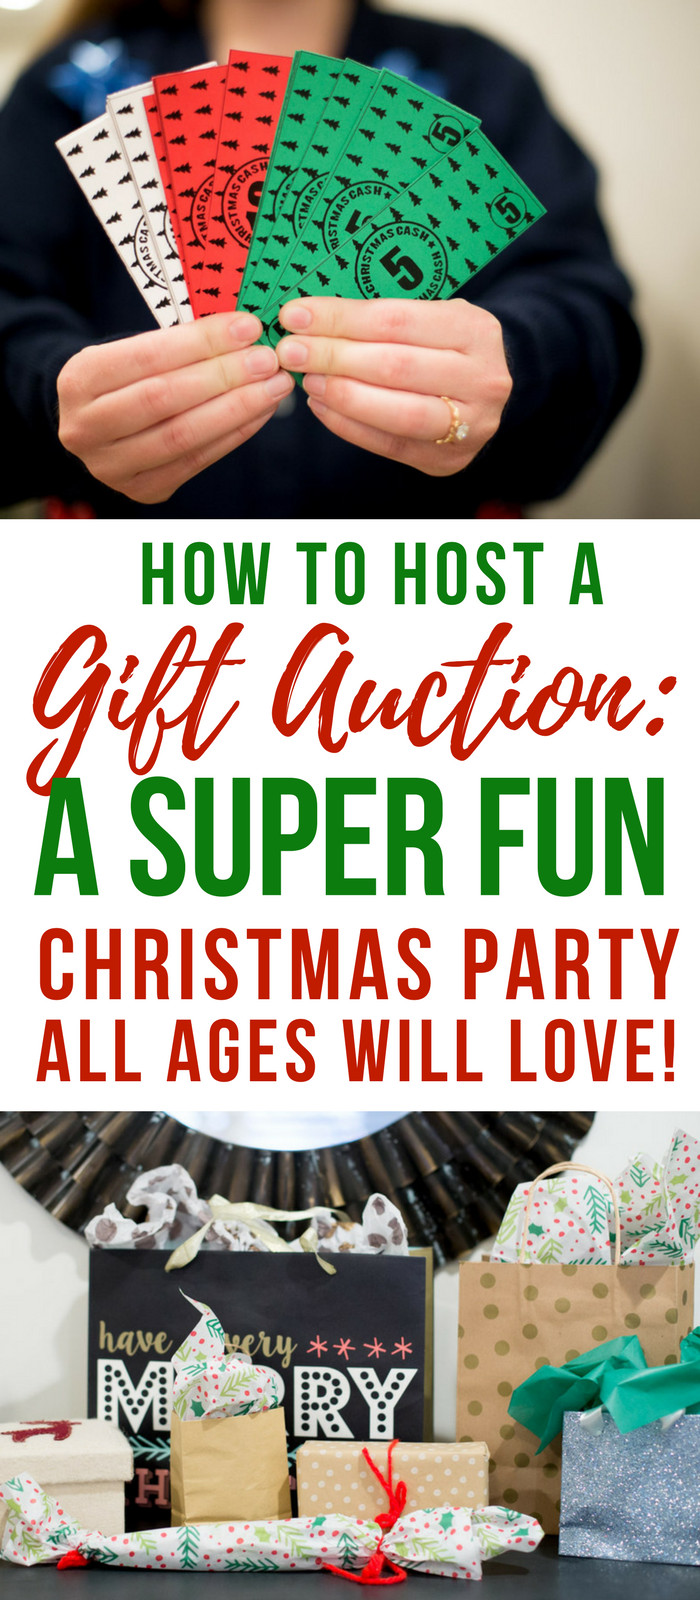 Gift Ideas Office Christmas Party
 How to Do A Christmas Party Gift Auction White Elephant